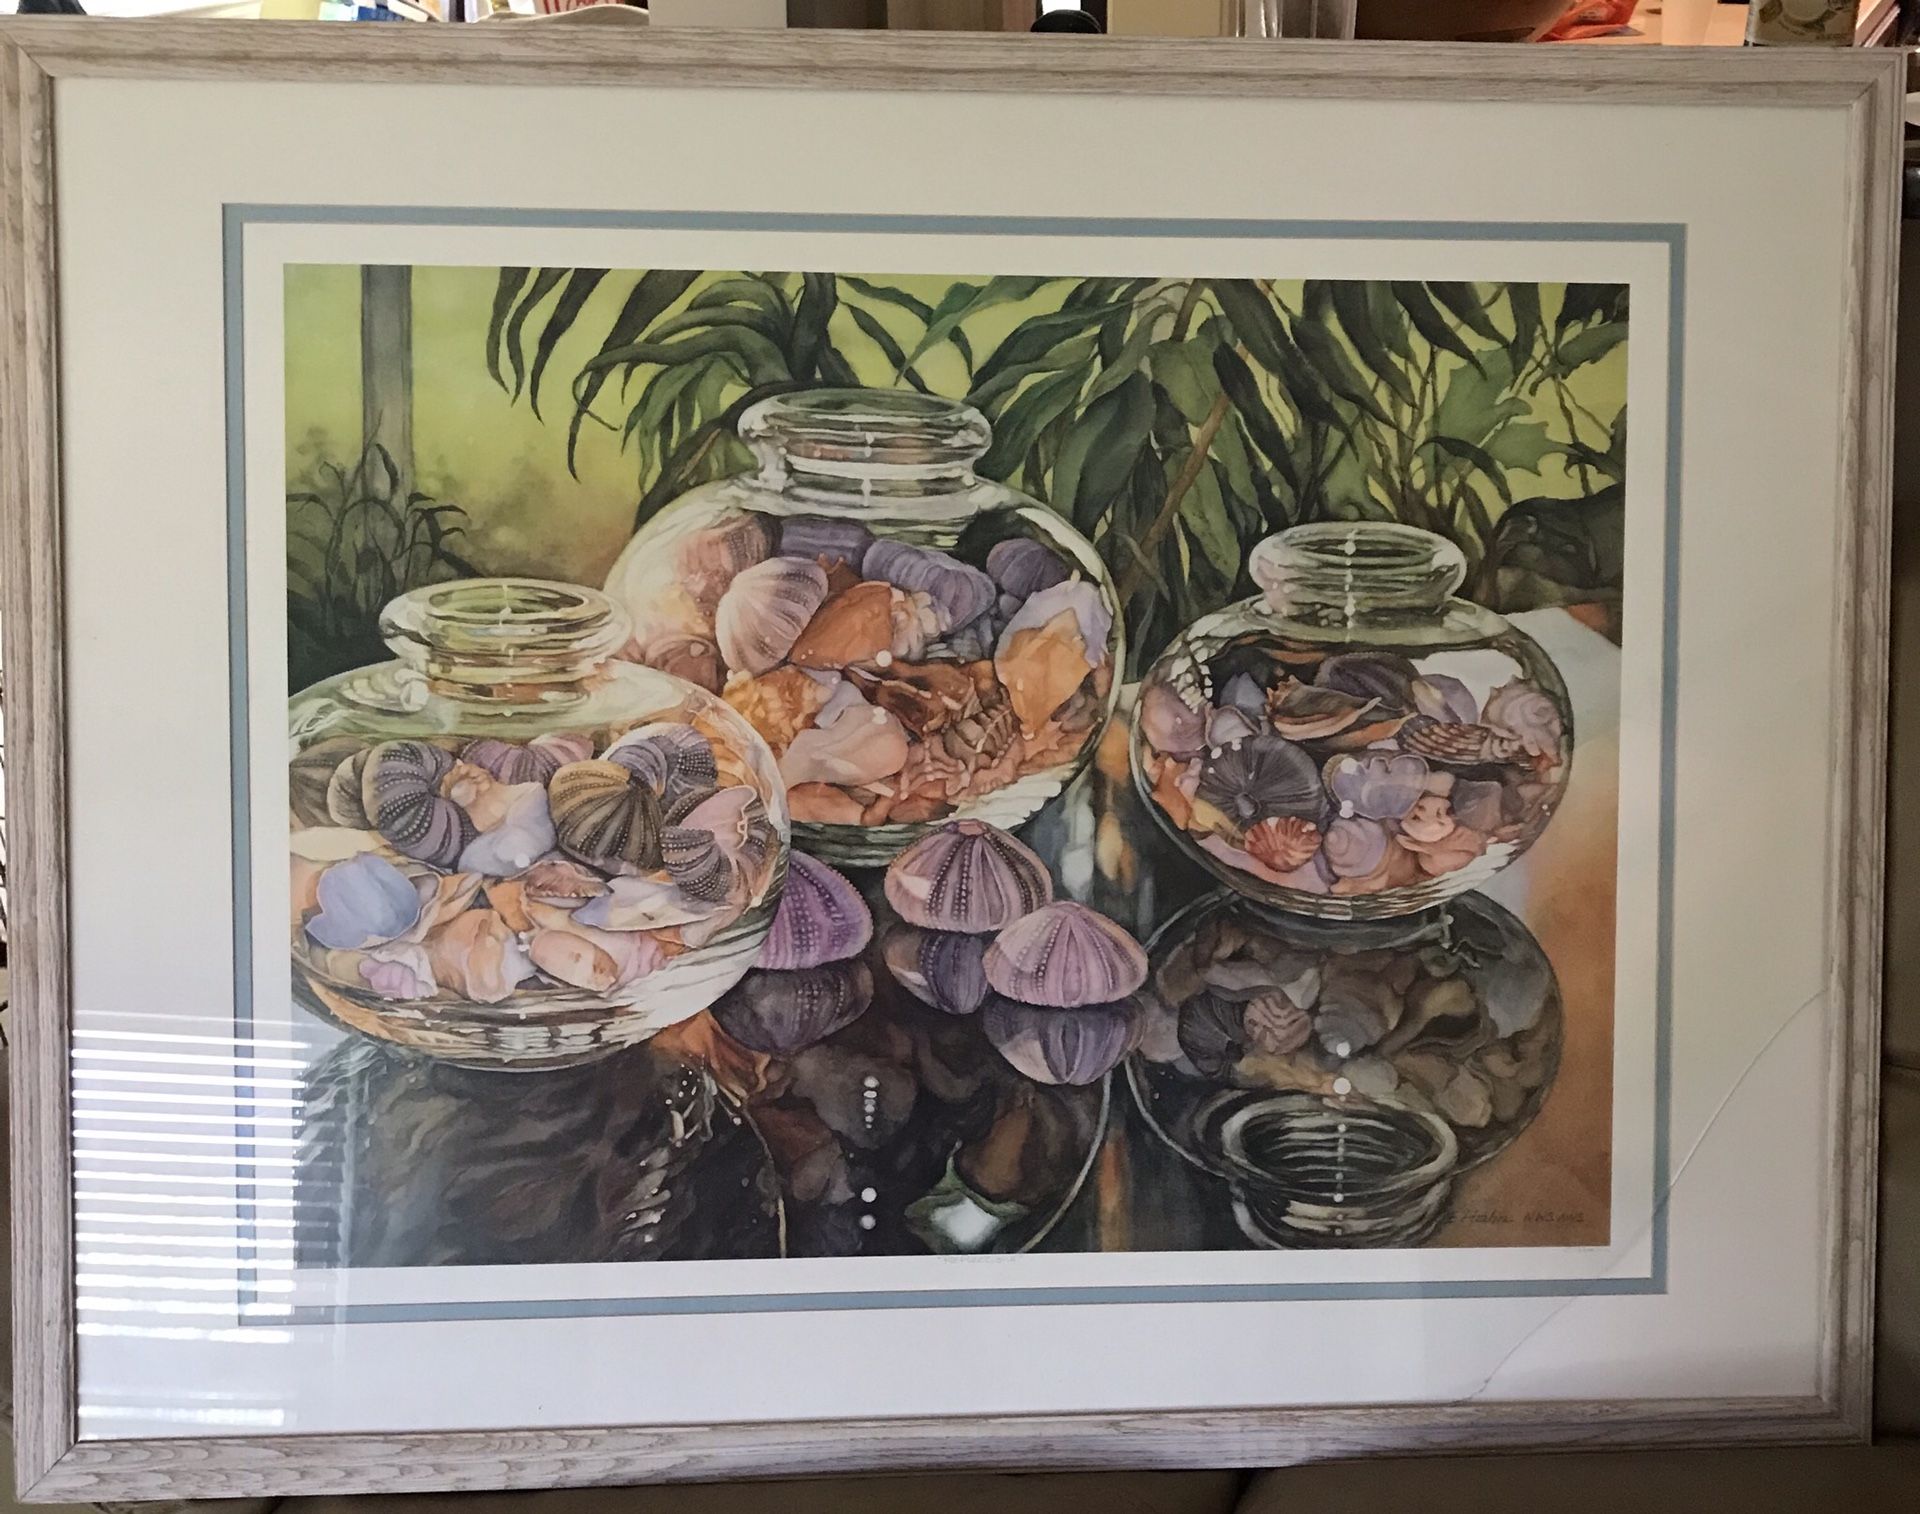 Signed limited addition of artist E. Hahn’s watercolor painting